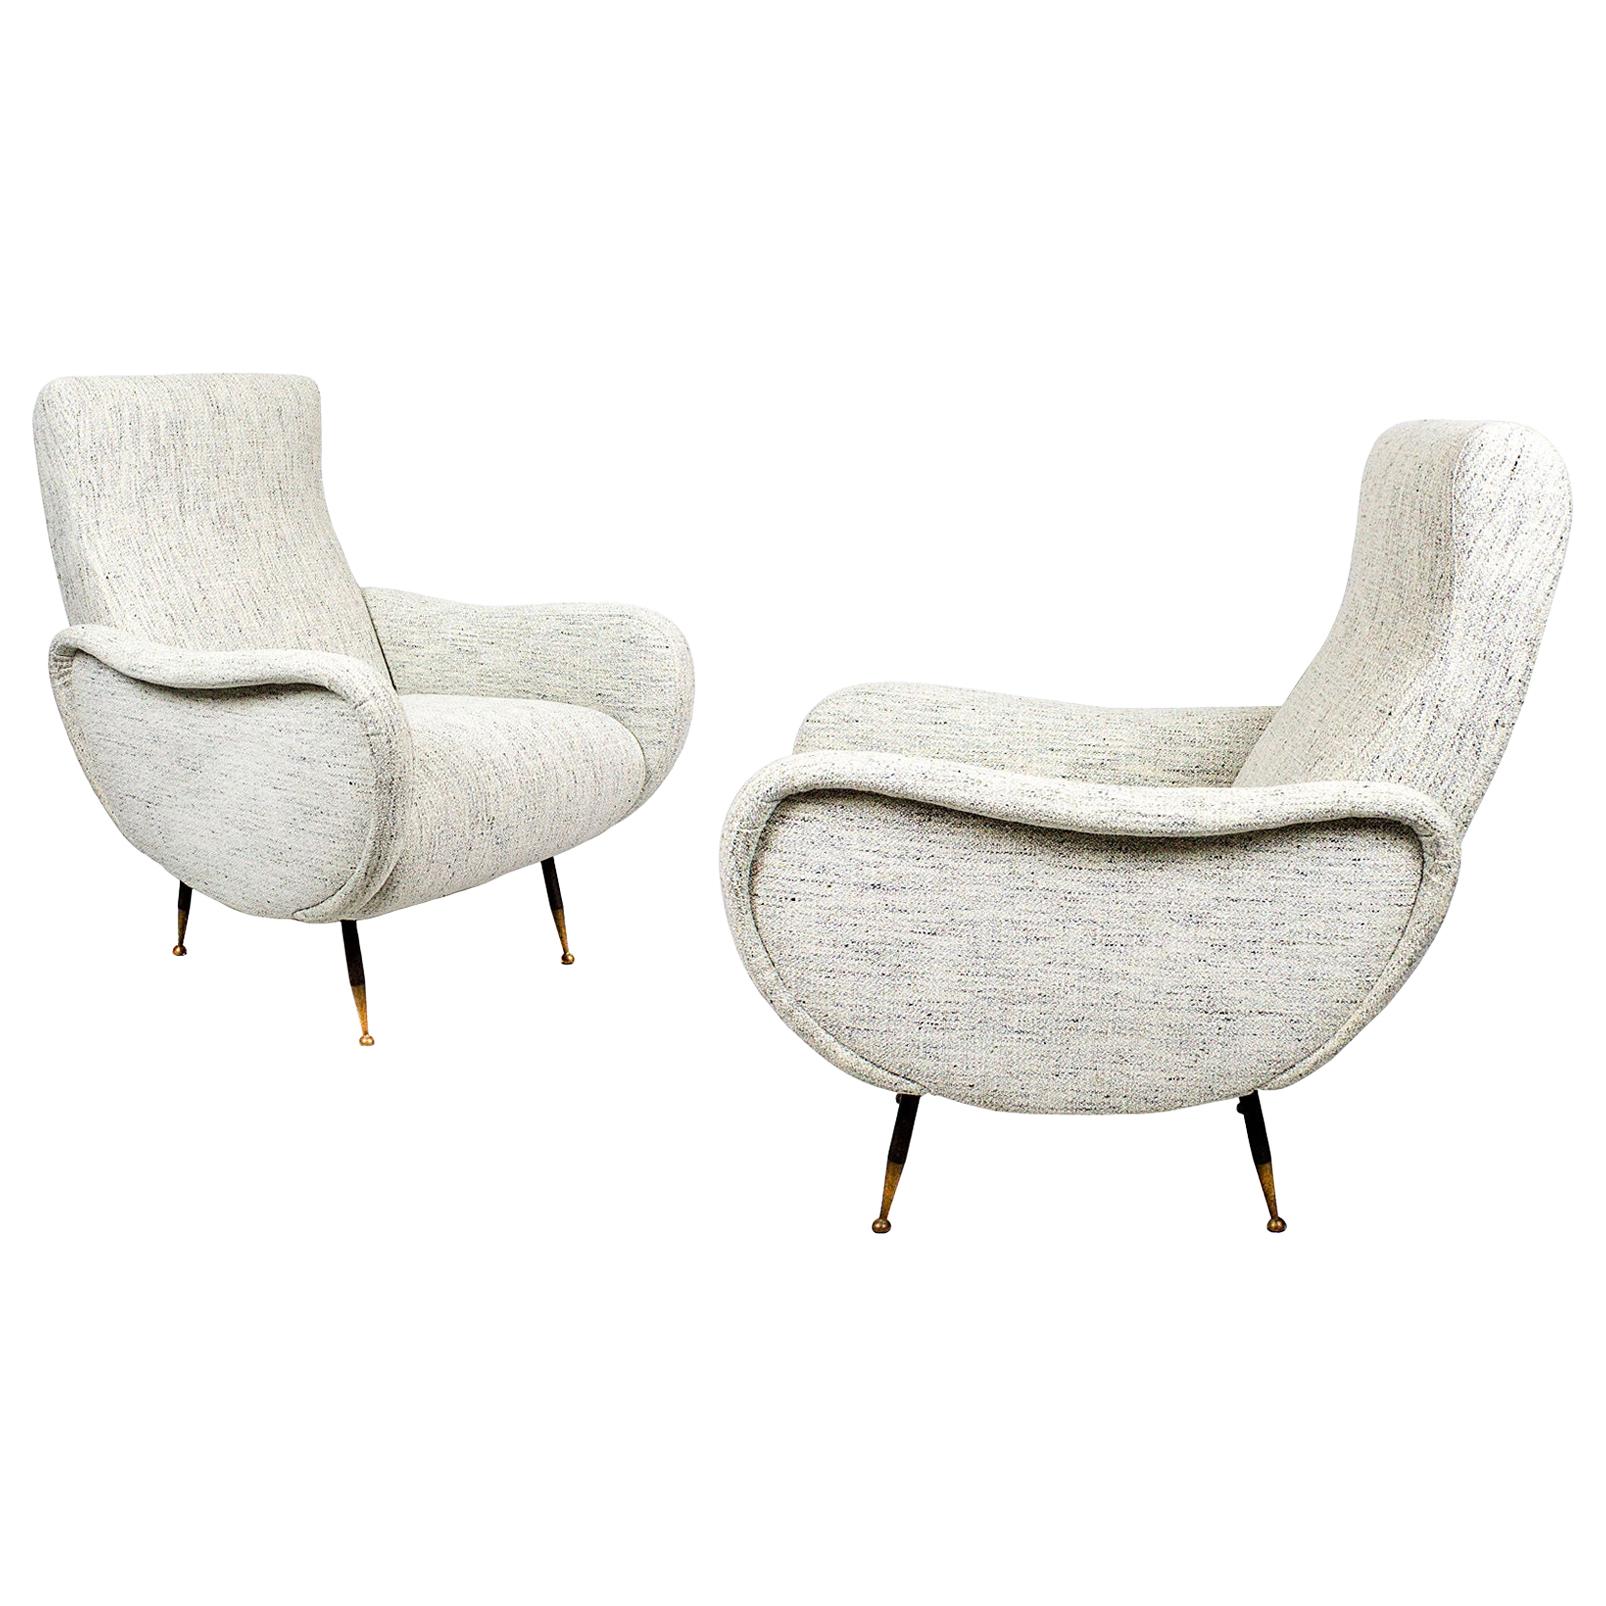 Pair of Mid-Century Modern Armchairs, Steel and Brass, Flecked Fabric - Italy For Sale